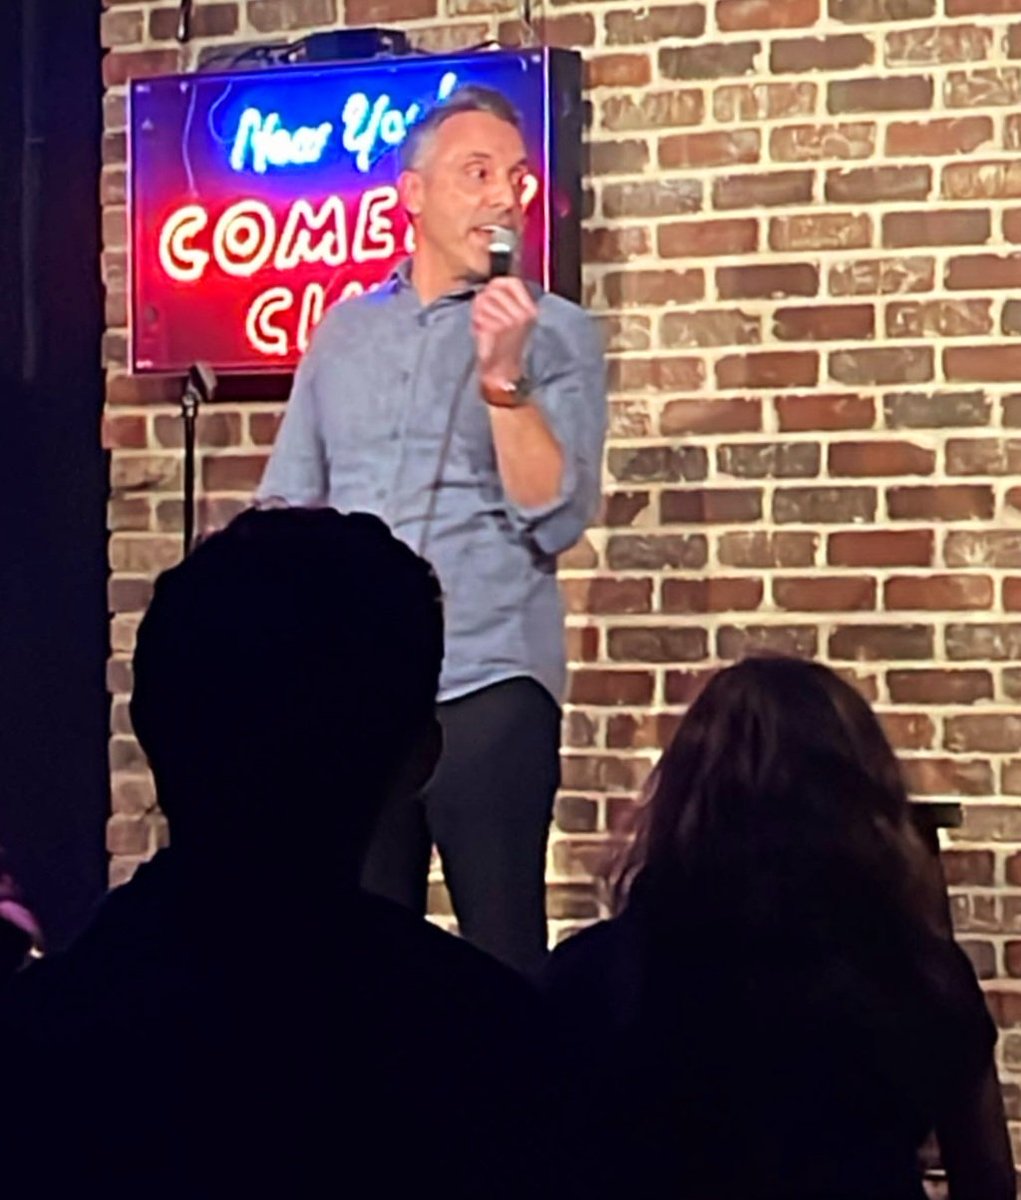 From last night's show. Always good energy and fun people @nycomedyclub 

#NYCcomedy